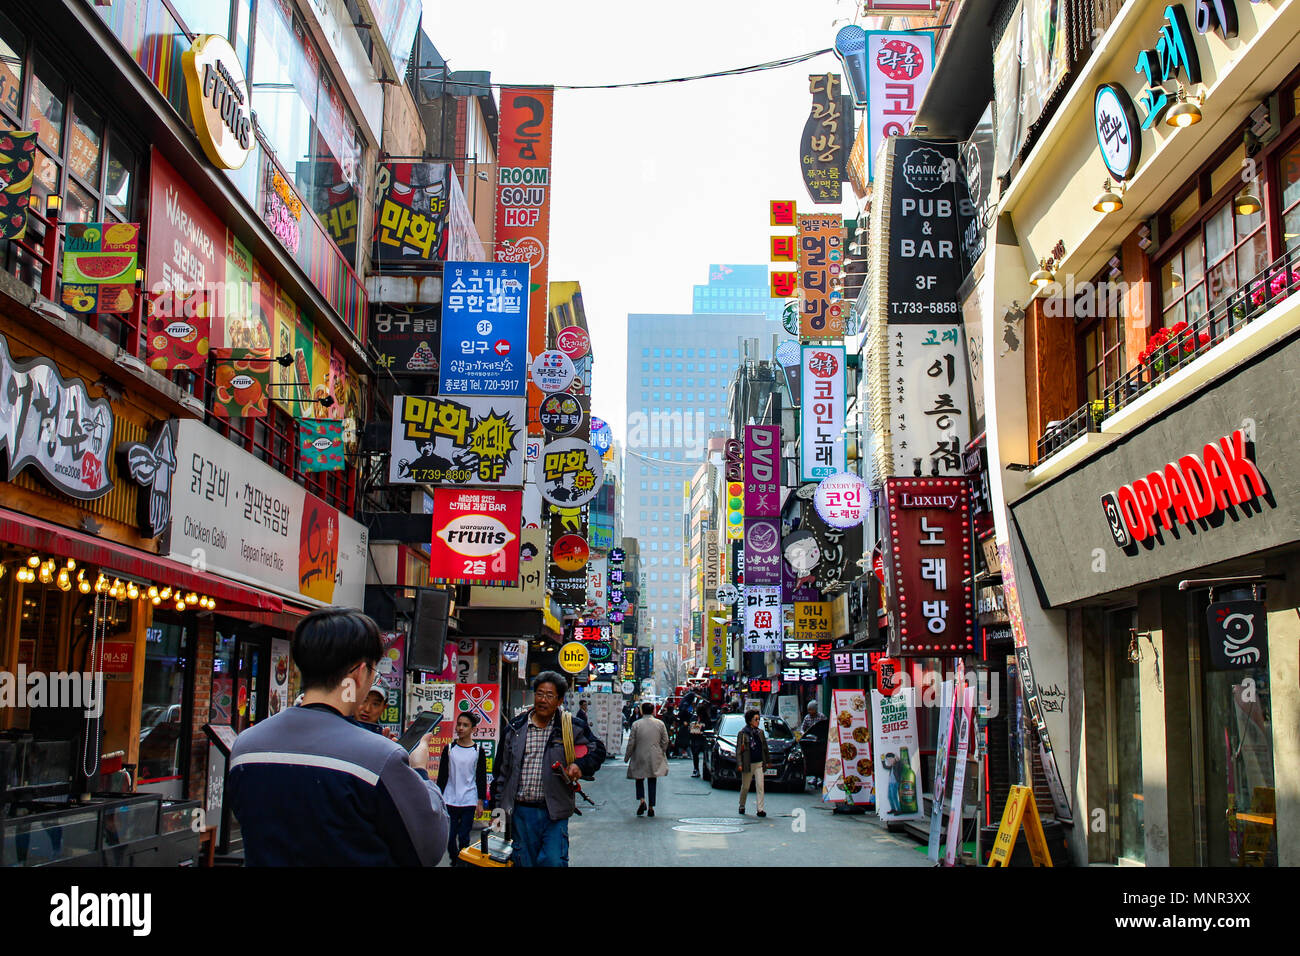 Street of Seoul, Korea with many shop signs and restaurants Stock Photo